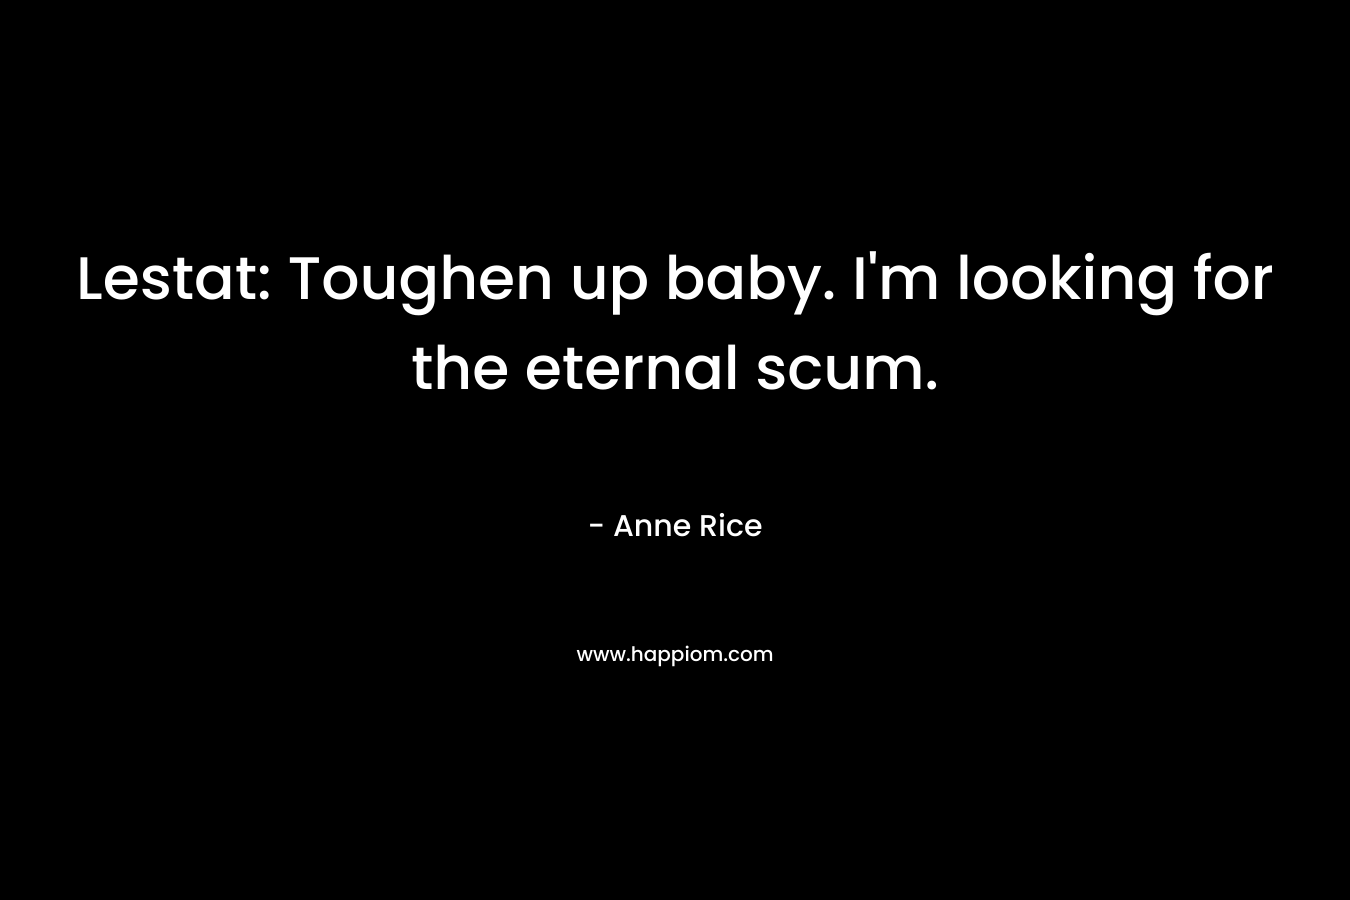 Lestat: Toughen up baby. I’m looking for the eternal scum. – Anne Rice